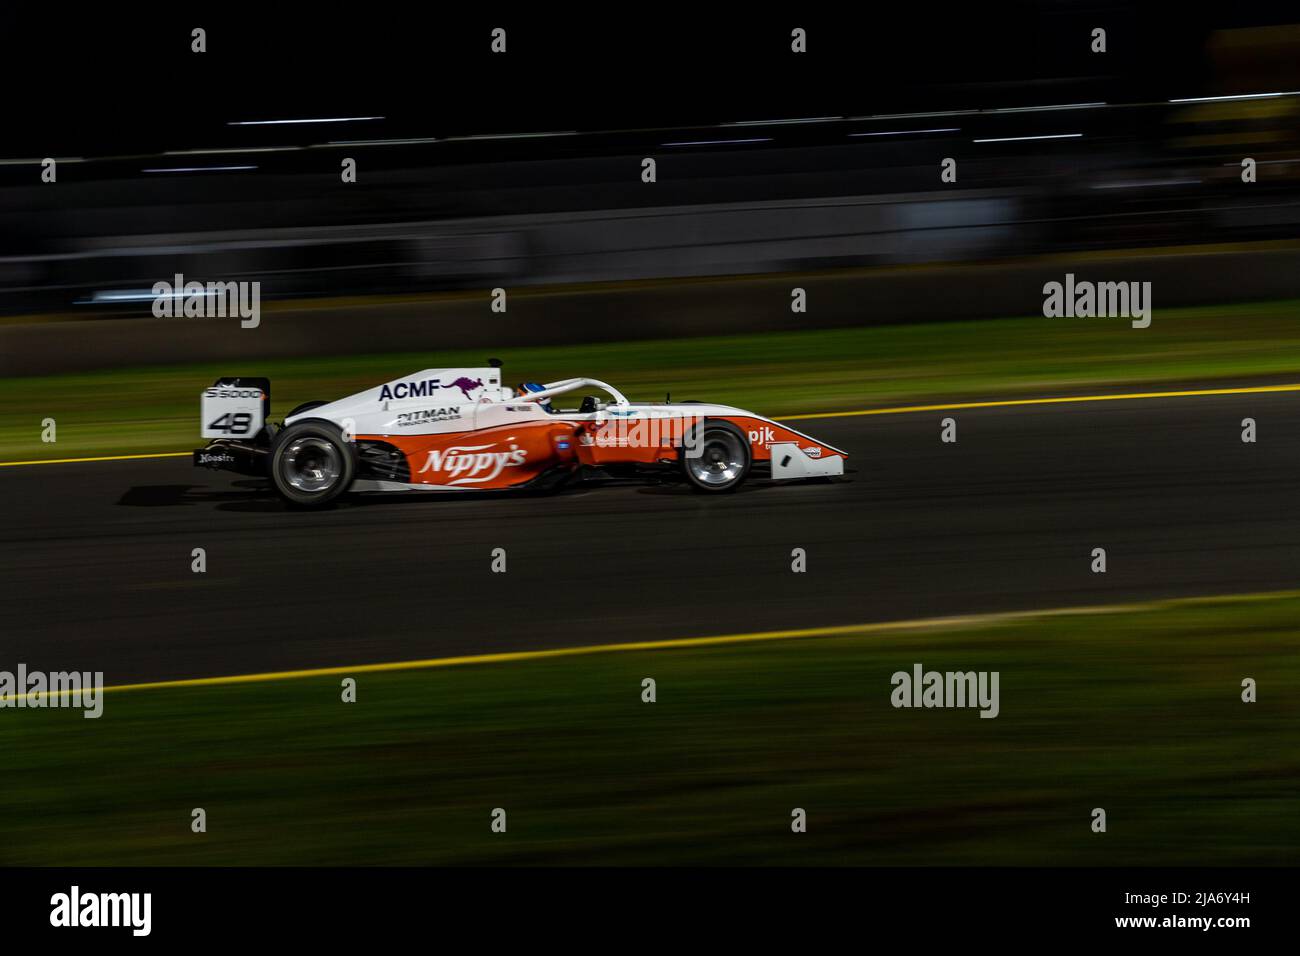 Sydney, Australia. 28 May, 2022. Blake Purdie (#48) piloting his Nippy's S5000 over the bridge at Sydney Motorsport Park during Race 1 of the S5000 Australian Driver's Championship. Credit: James Forrester / Alamy Live News. Stock Photo